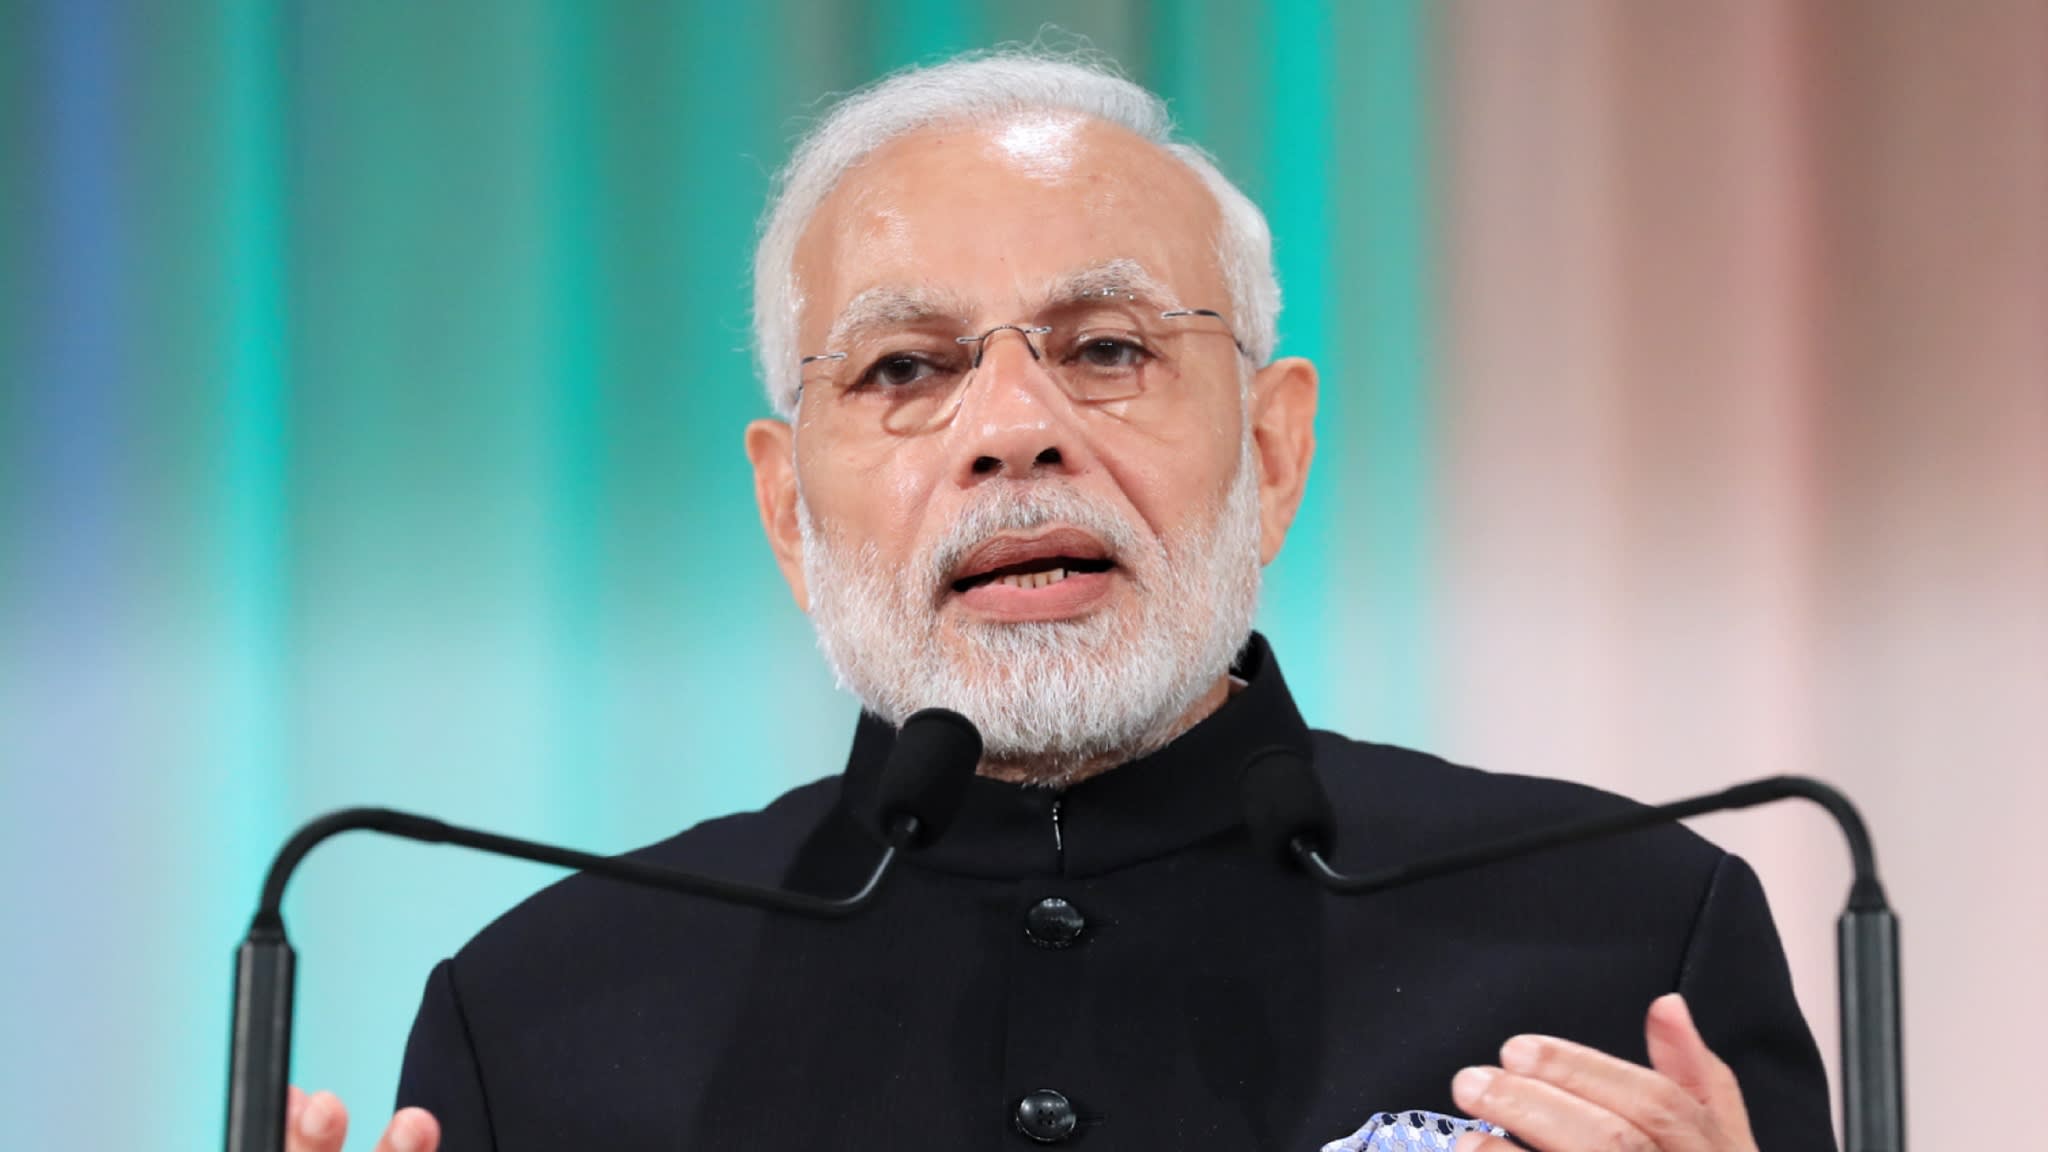 Pandemic affected the Indian economy but recovery is faster than the damage: PM